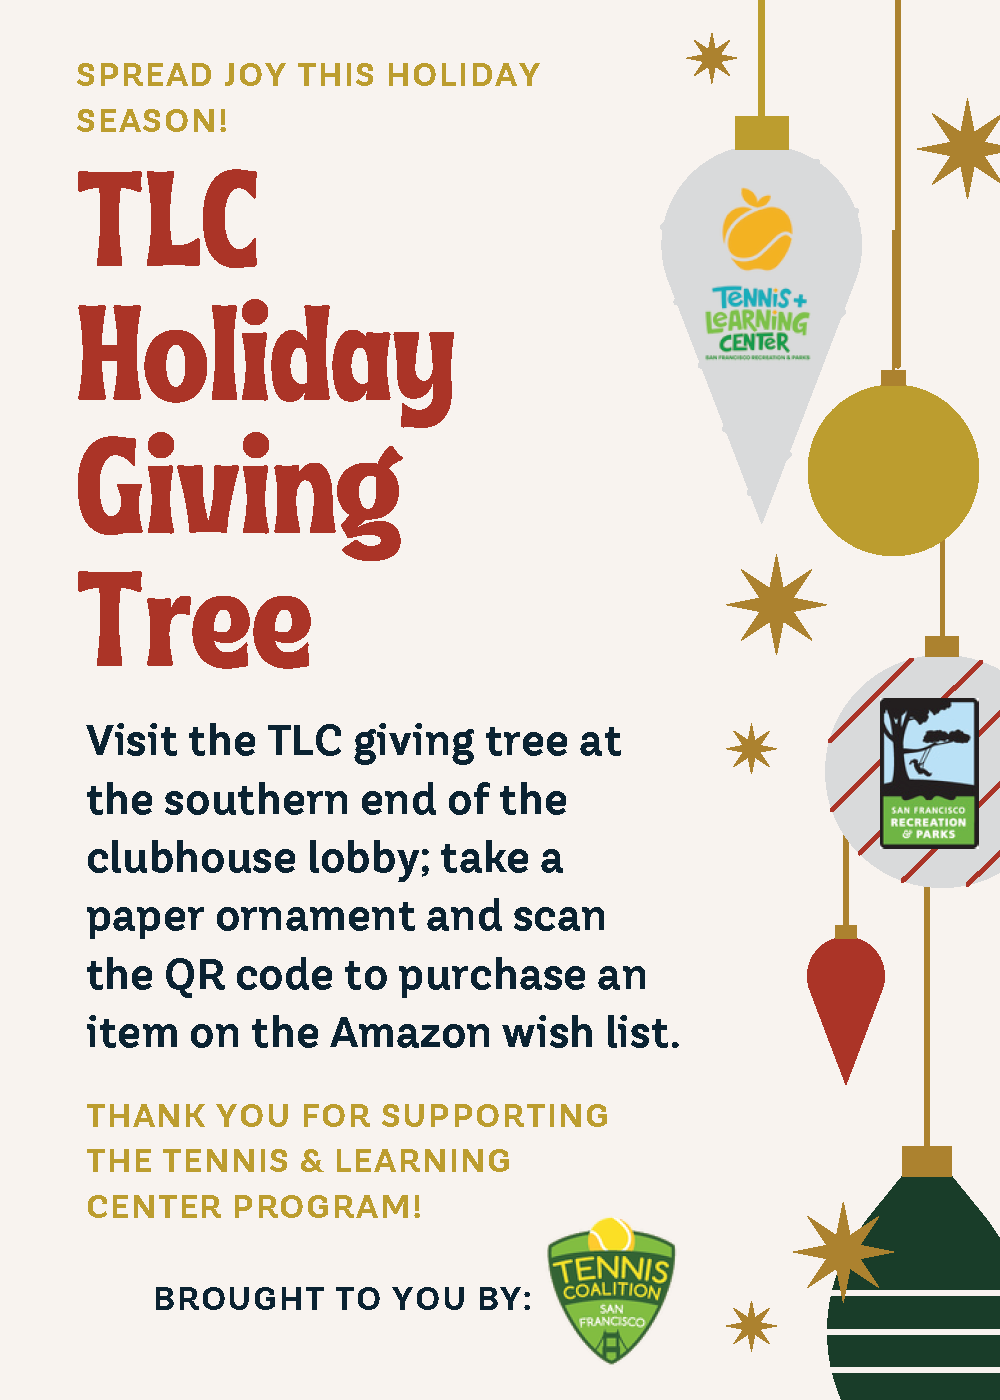 TLC holiday giving tree